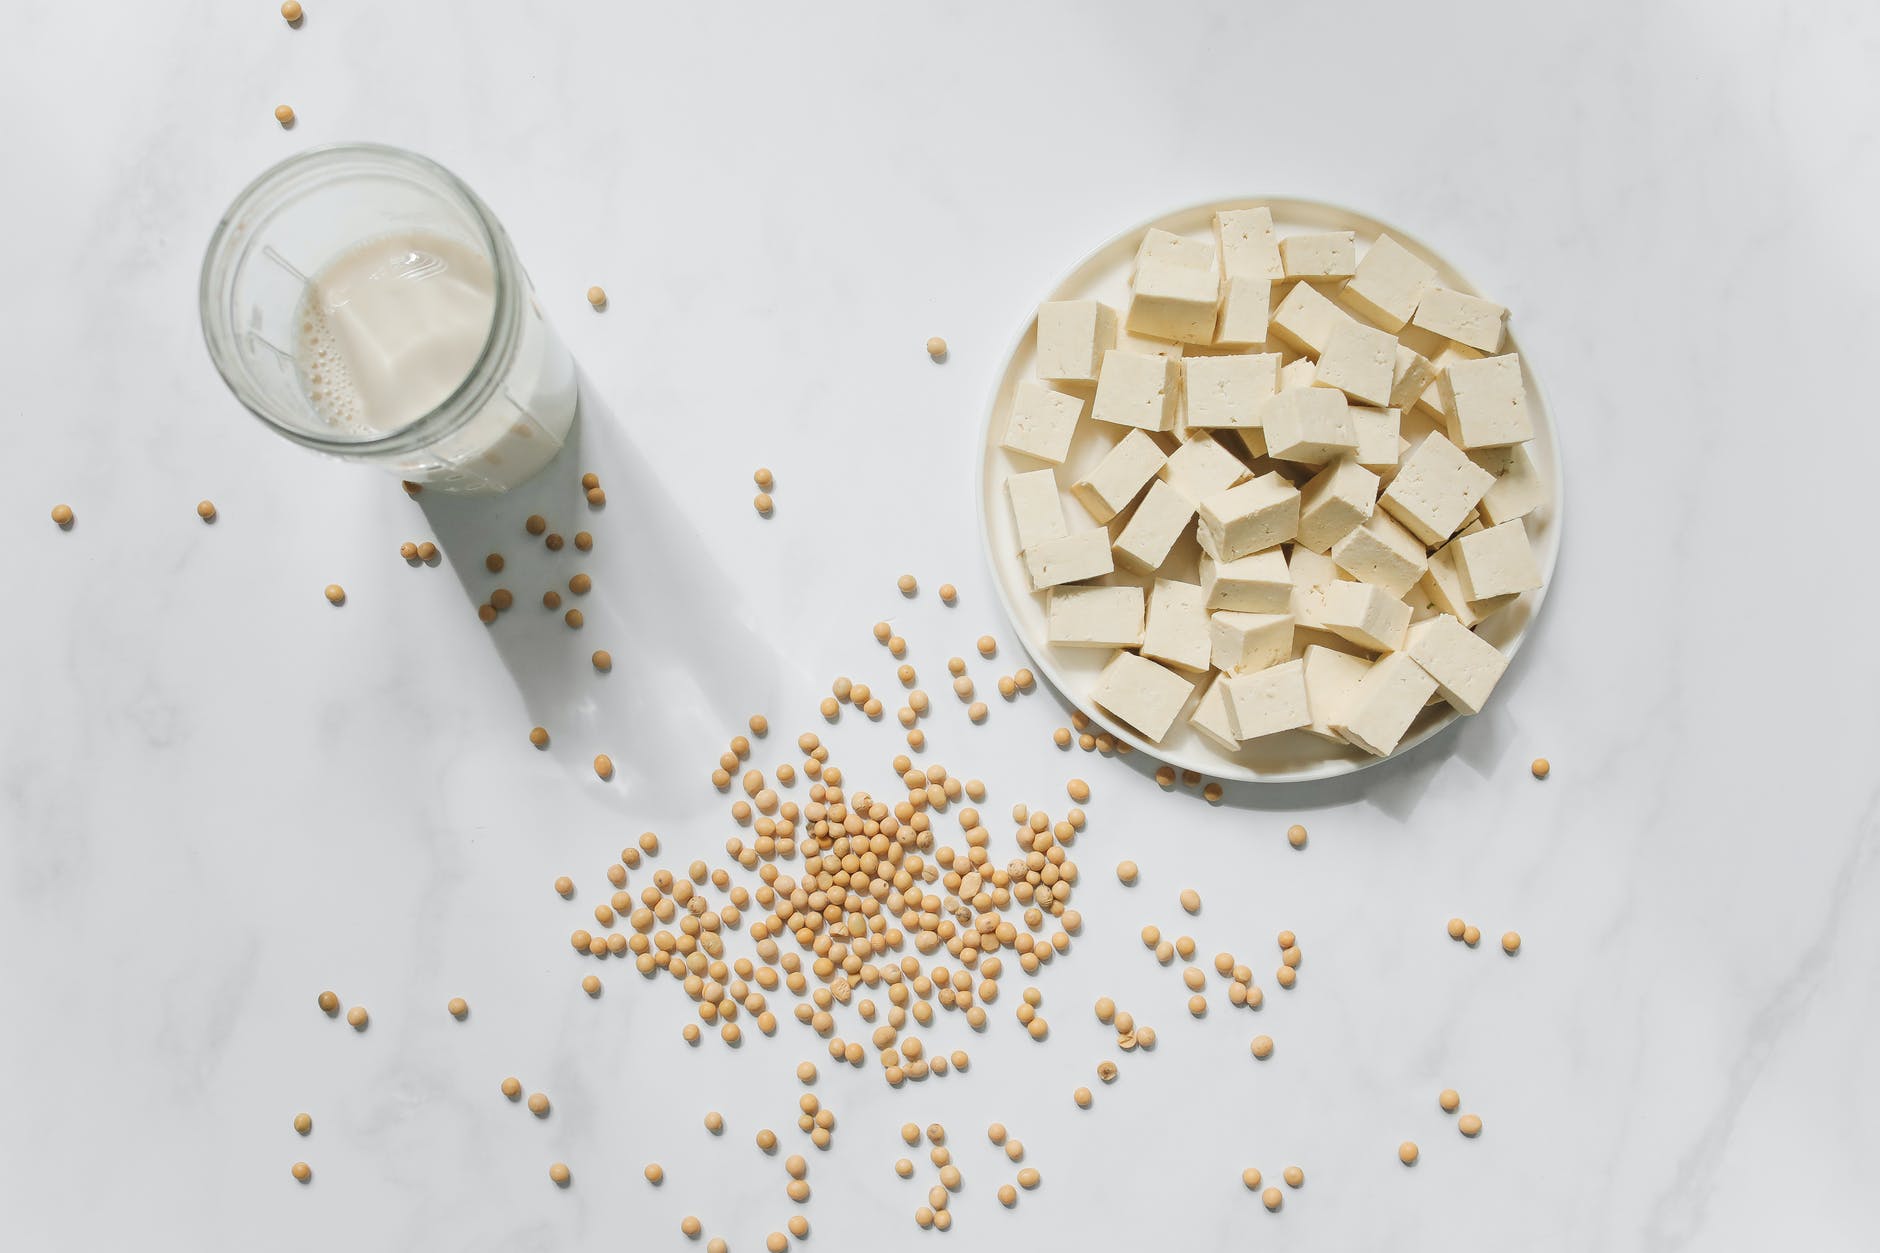 photo of tofu soybeans and soy milk against white background